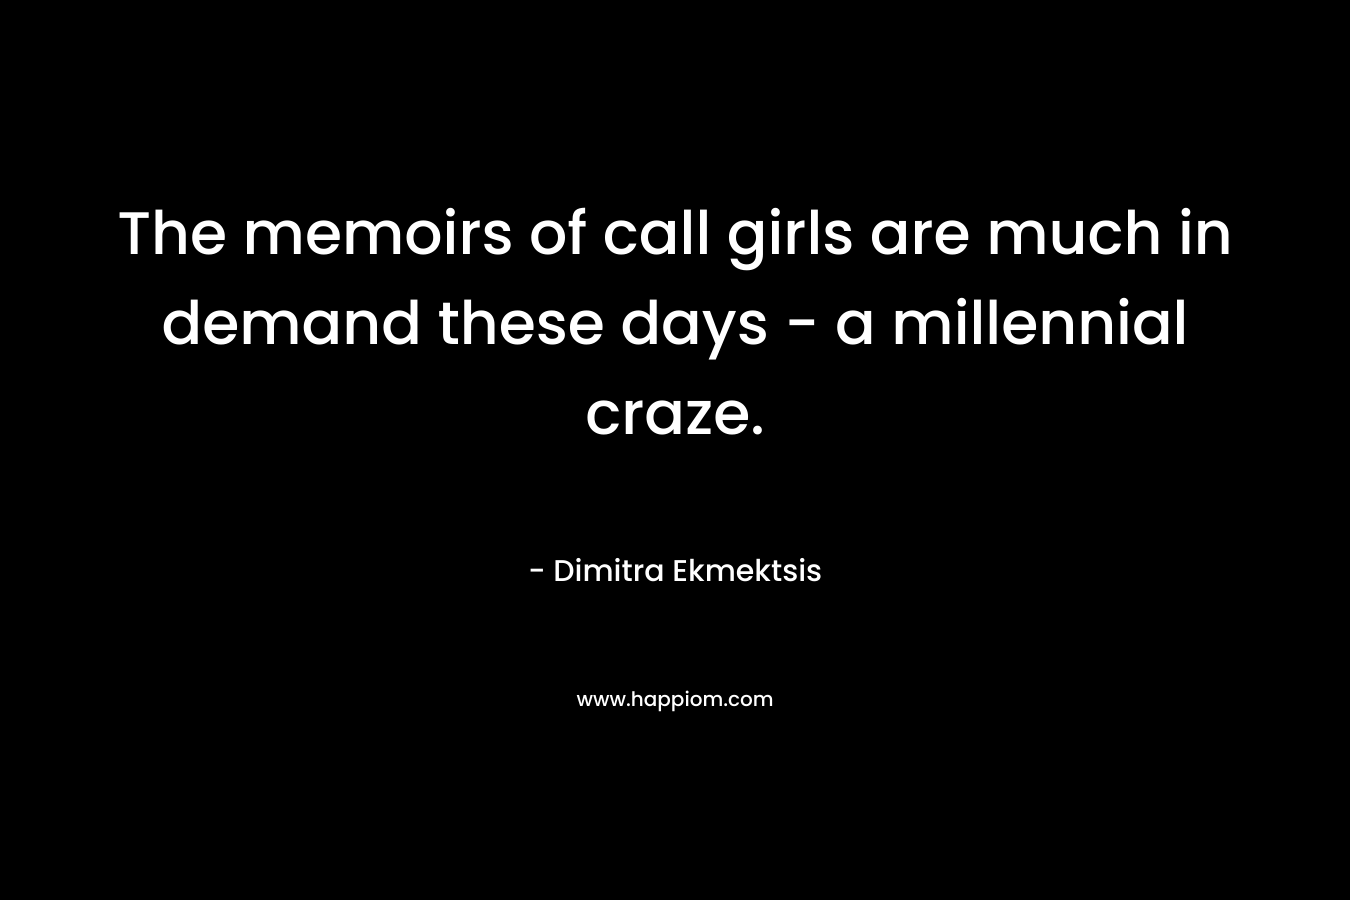 The memoirs of call girls are much in demand these days – a millennial craze. – Dimitra Ekmektsis